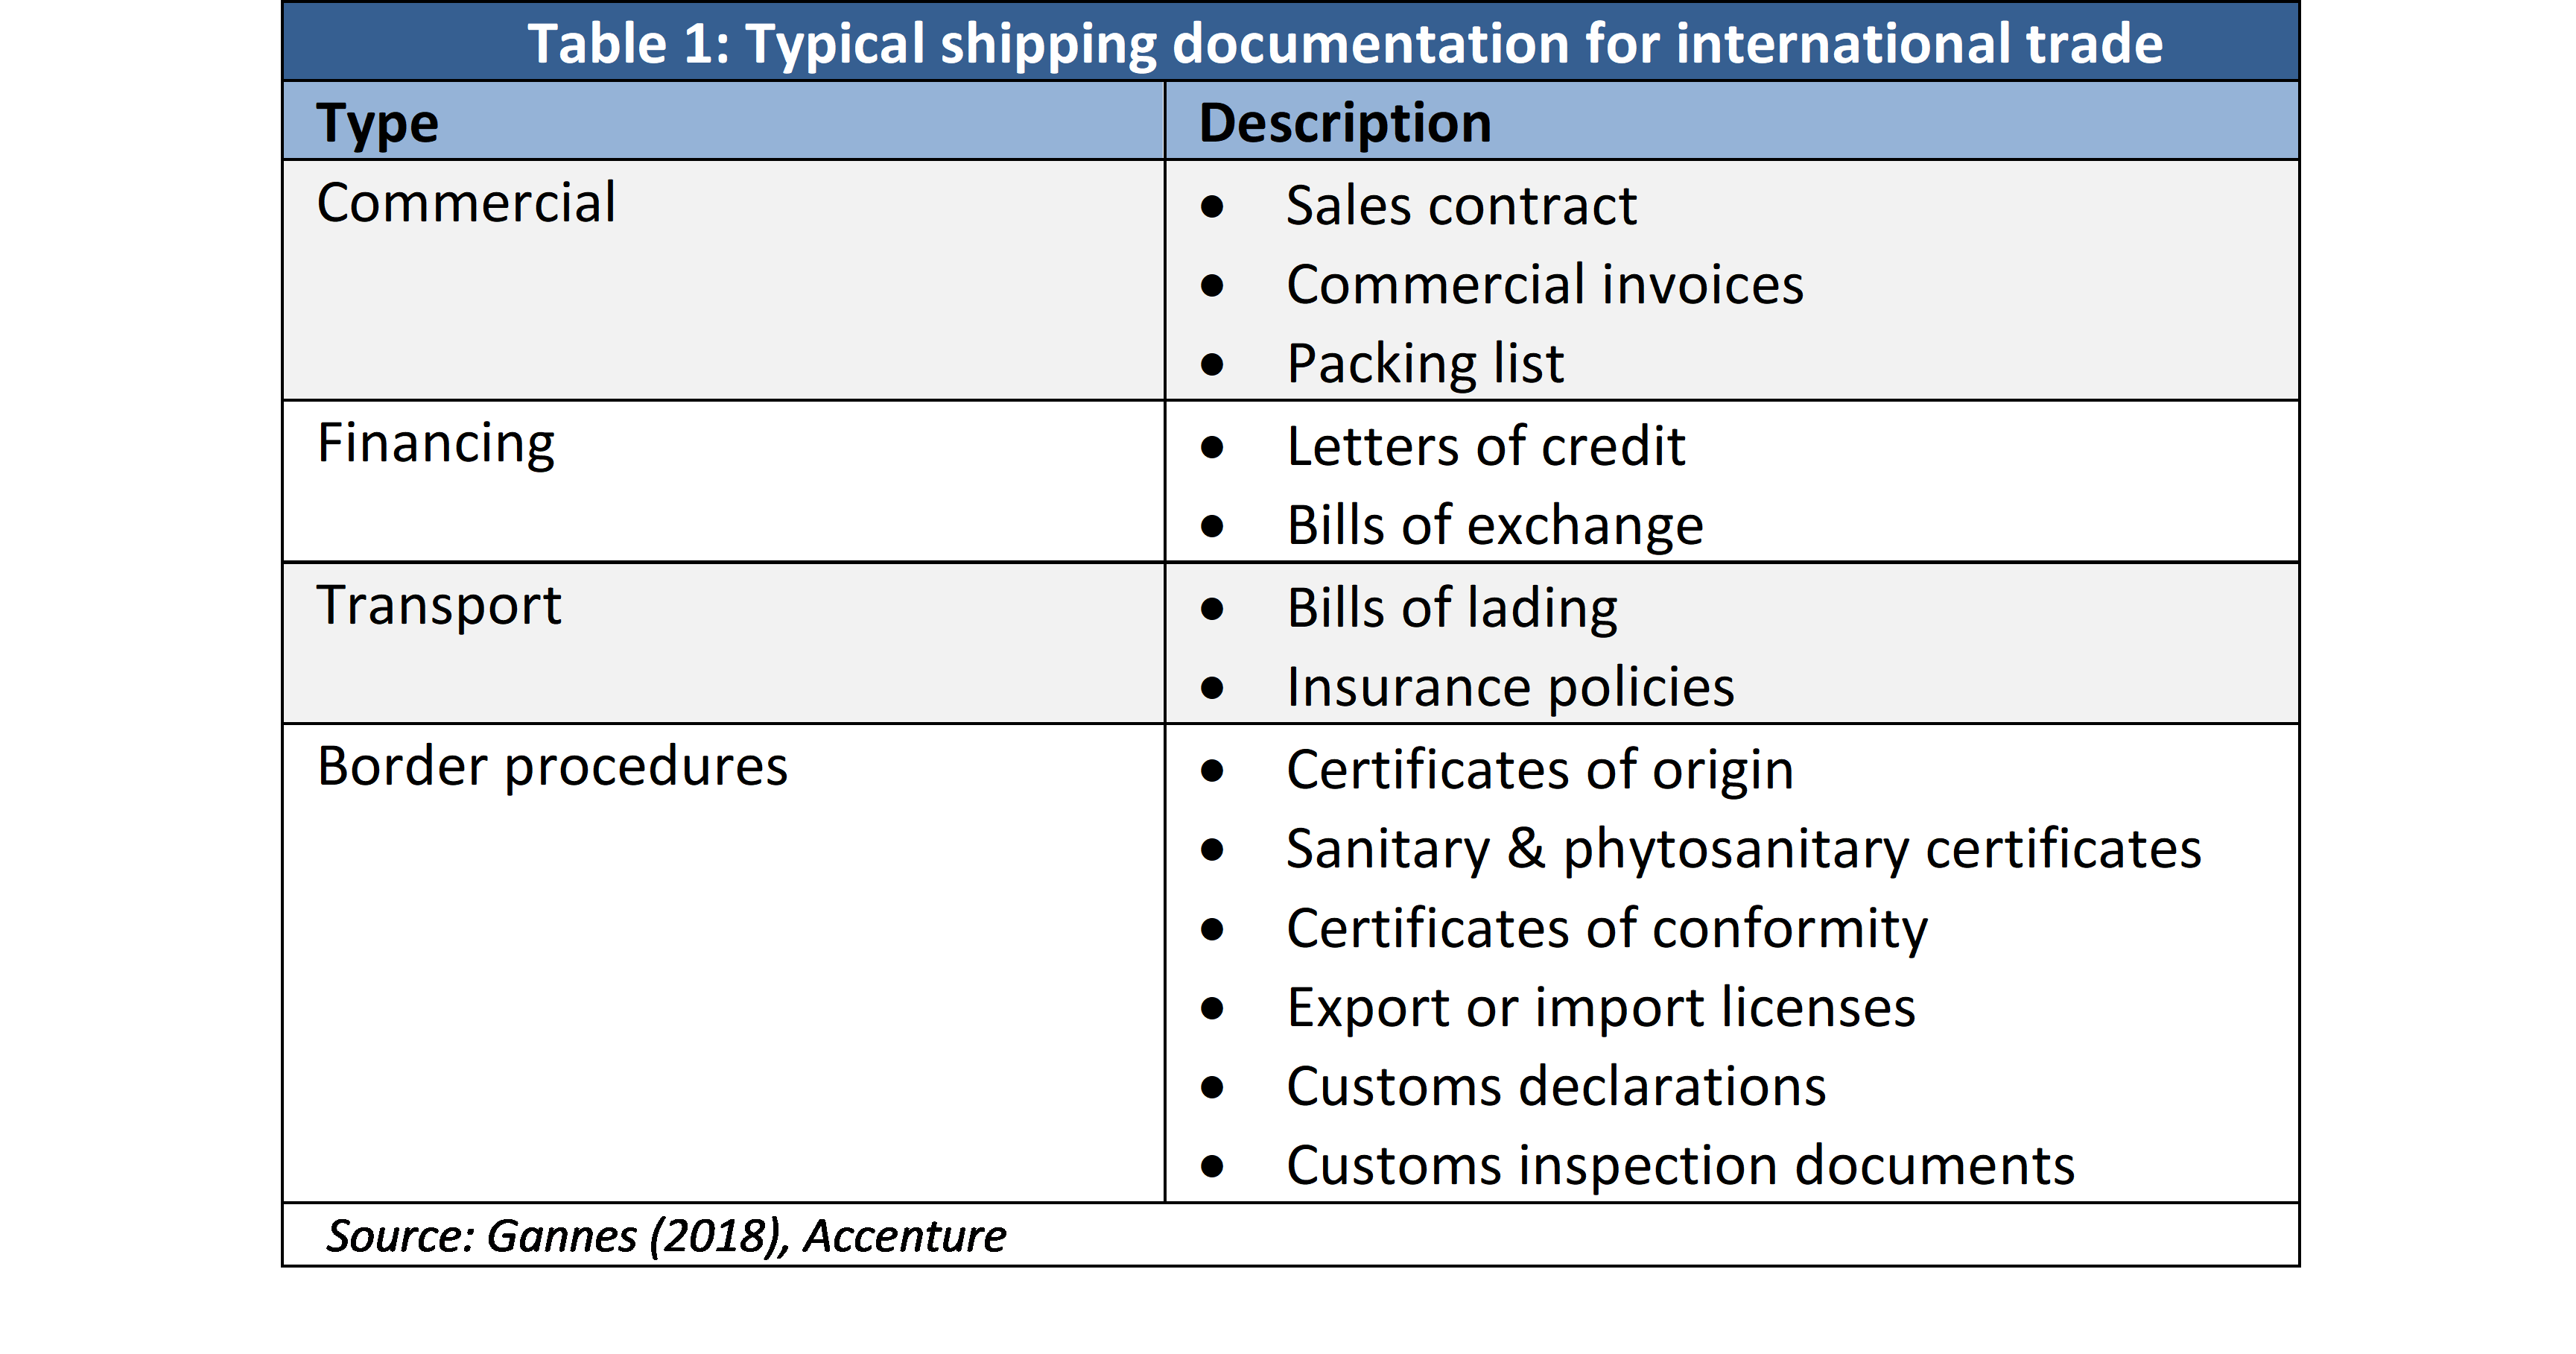 Table of typical shipping documentation for international trade